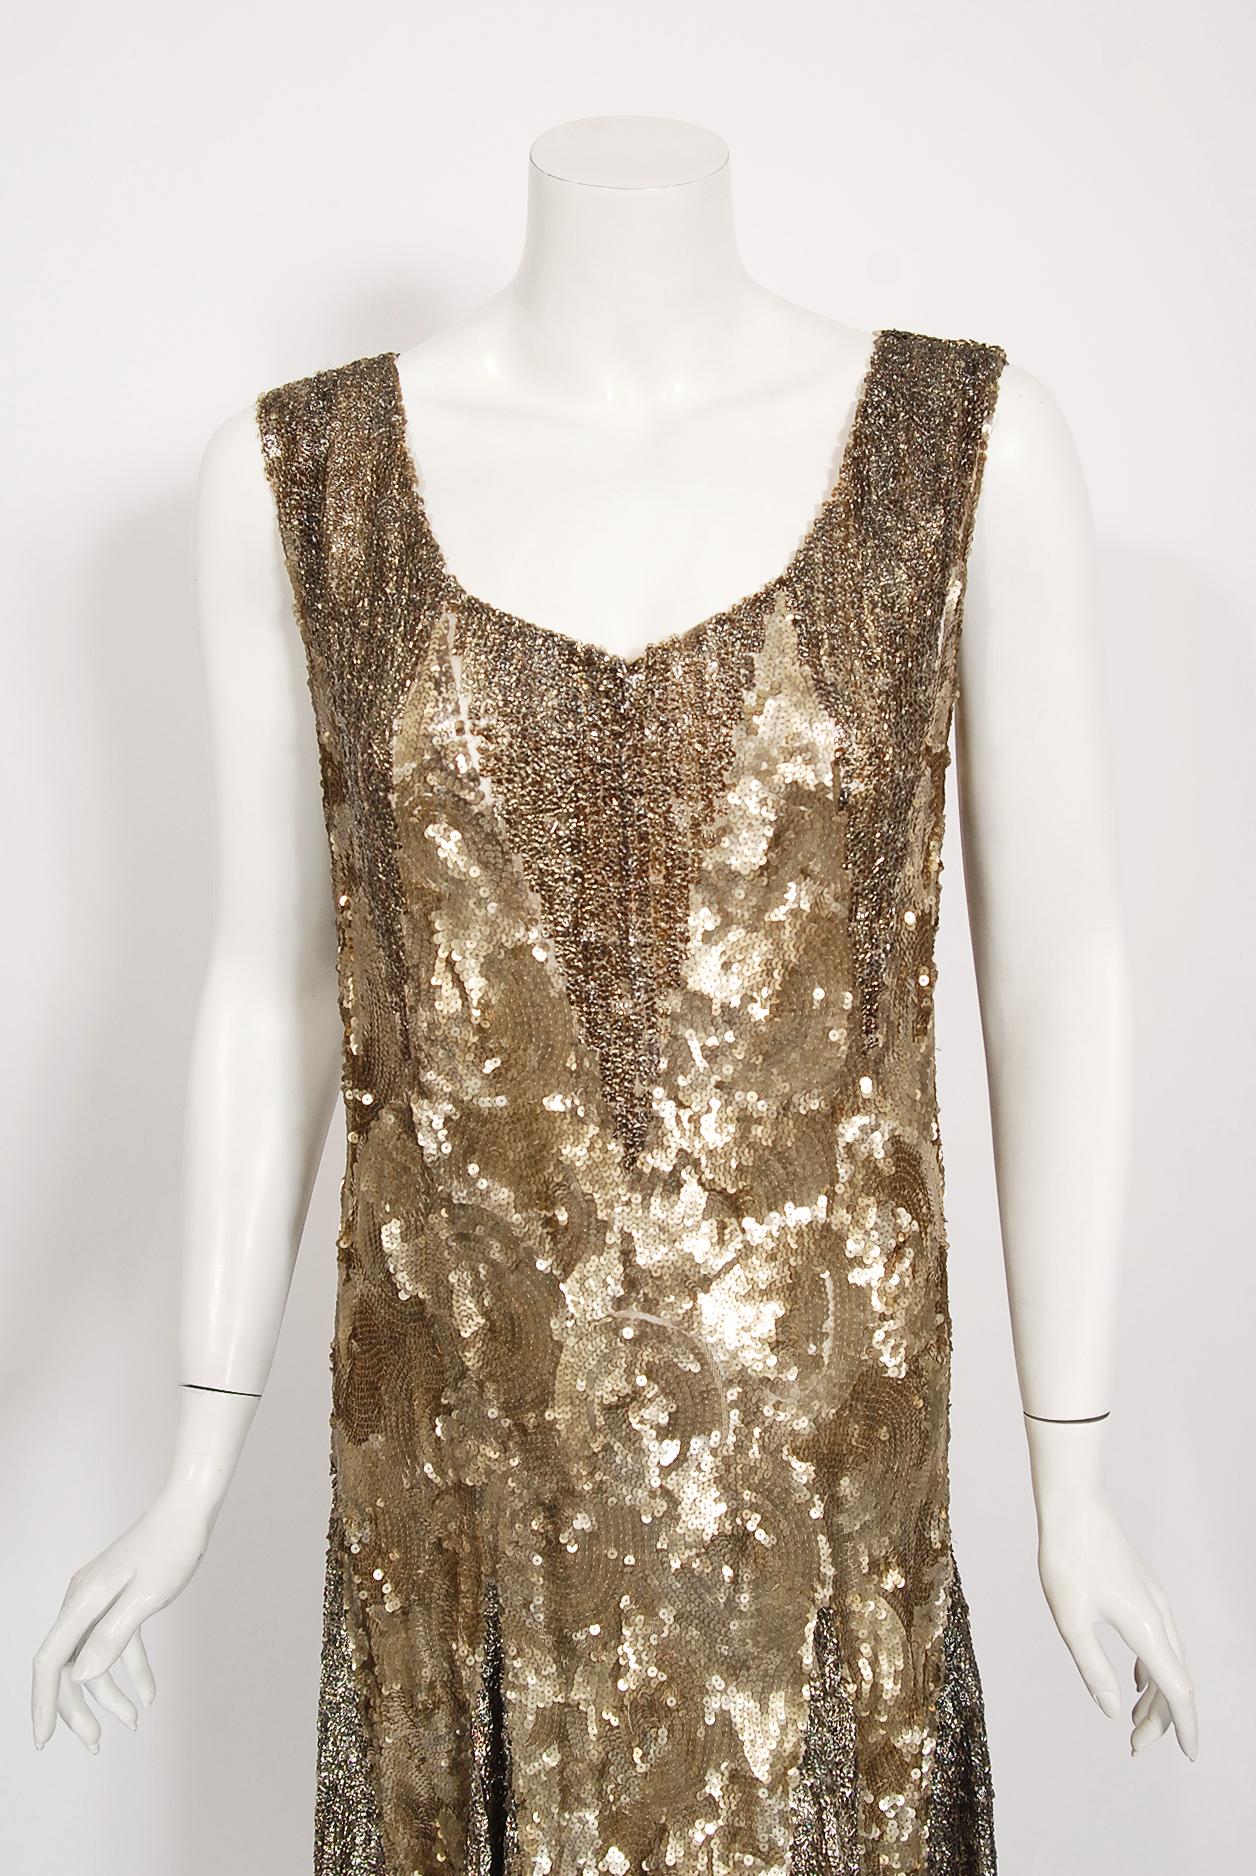 Breathtaking 1920's French sparkling cotton-net flapper dance dress. The metallic golden color palette mixed with the unique deco pattern touches a deep chord in our collective aesthetic consciousness. As fashion lovers, we never tire from antique